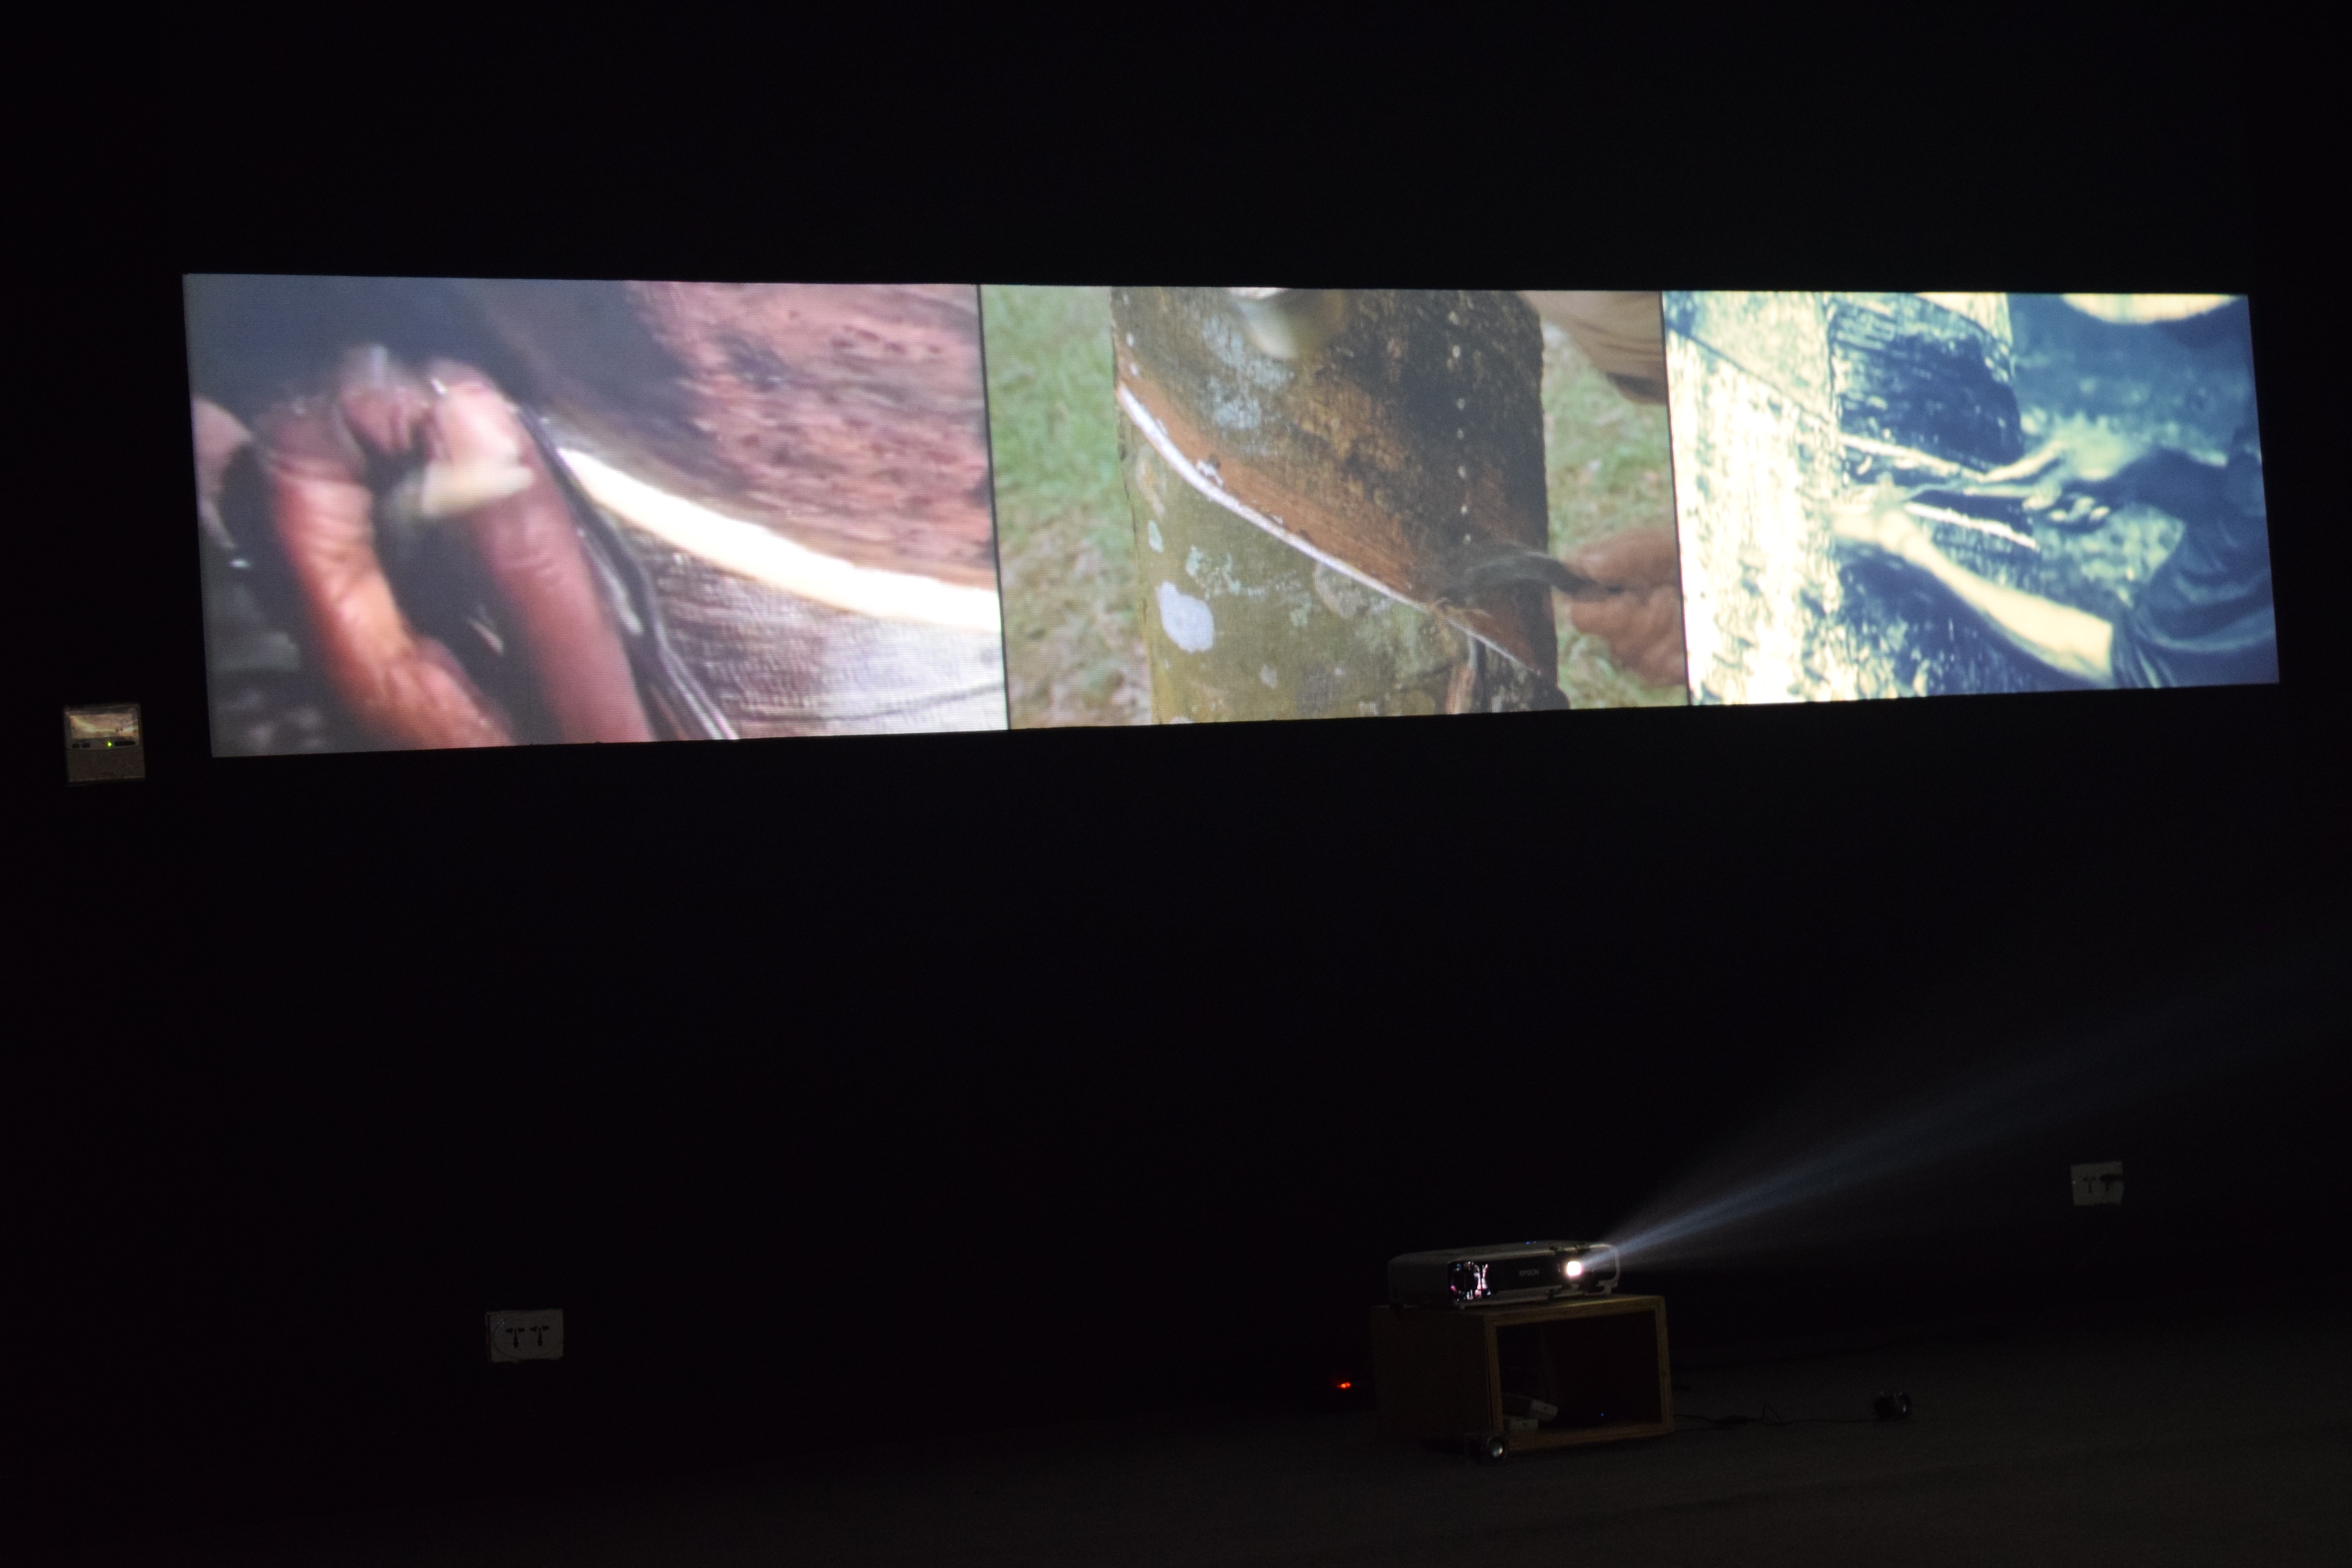 Black, Red and White<br> 
Video installation: 3 channels<br>
Nguyen Phuong Linh, 2015-16